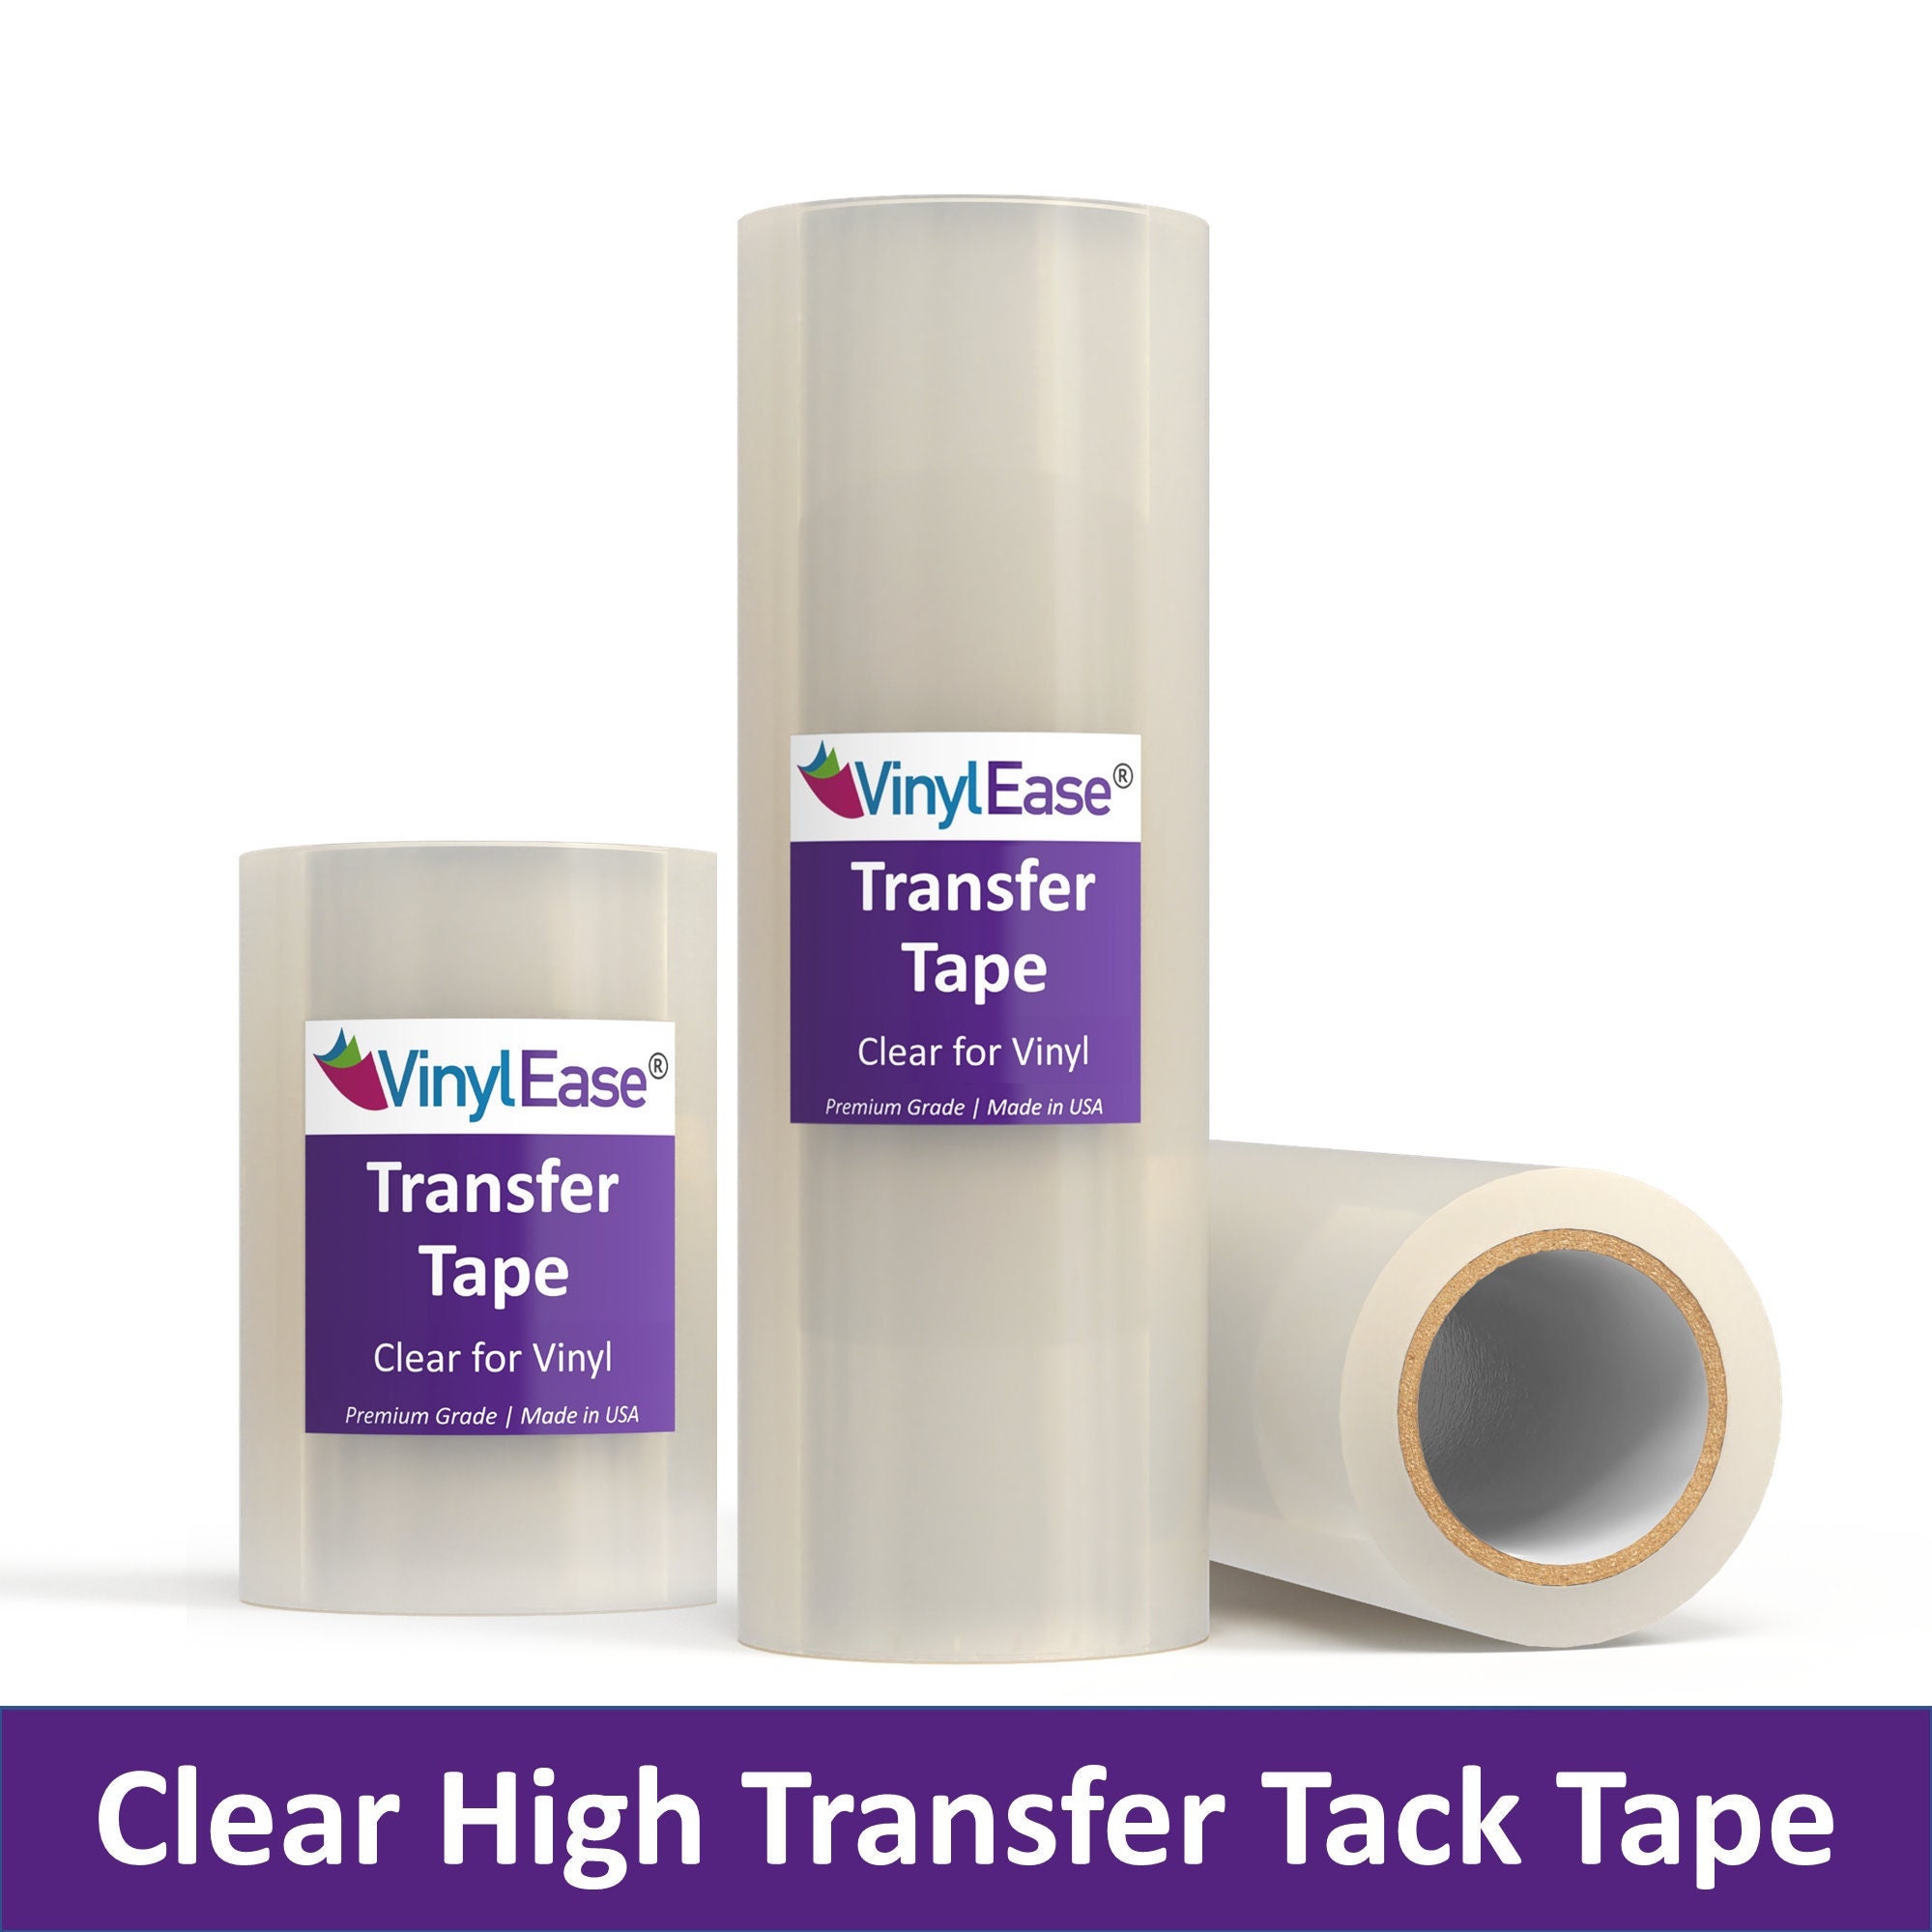  Vinyl Ease 12inch x 100 feet roll of Paper Transfer Tape with a  Medium to High Tack Layflat Adhesive. Works with a Variety of Vinyl. Great  for Decals, Signs, Wall Words